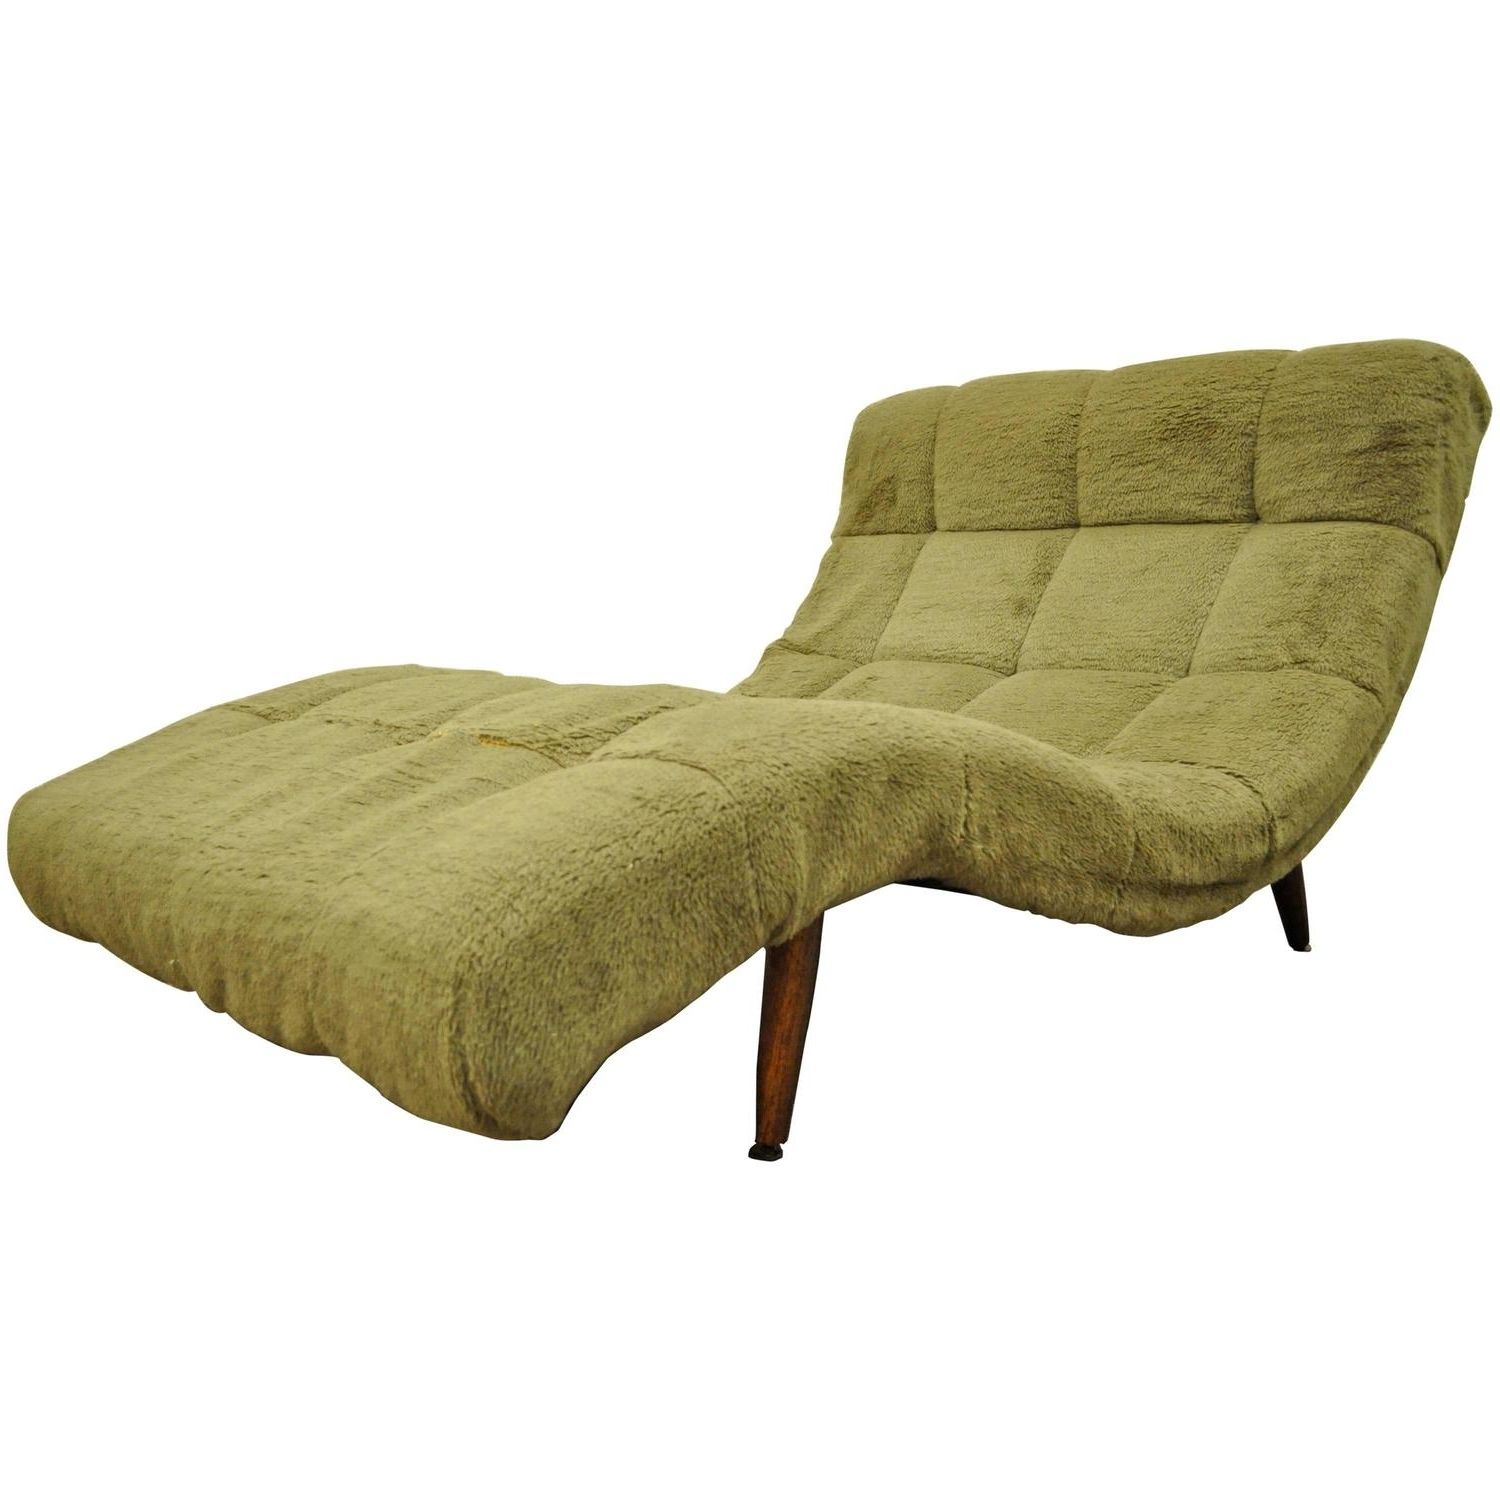 Contemporary Chaise Lounge Chairs Regarding Preferred Midcentury Modern Double Wide Wave Chaise Lounge In The Style Of (View 15 of 15)